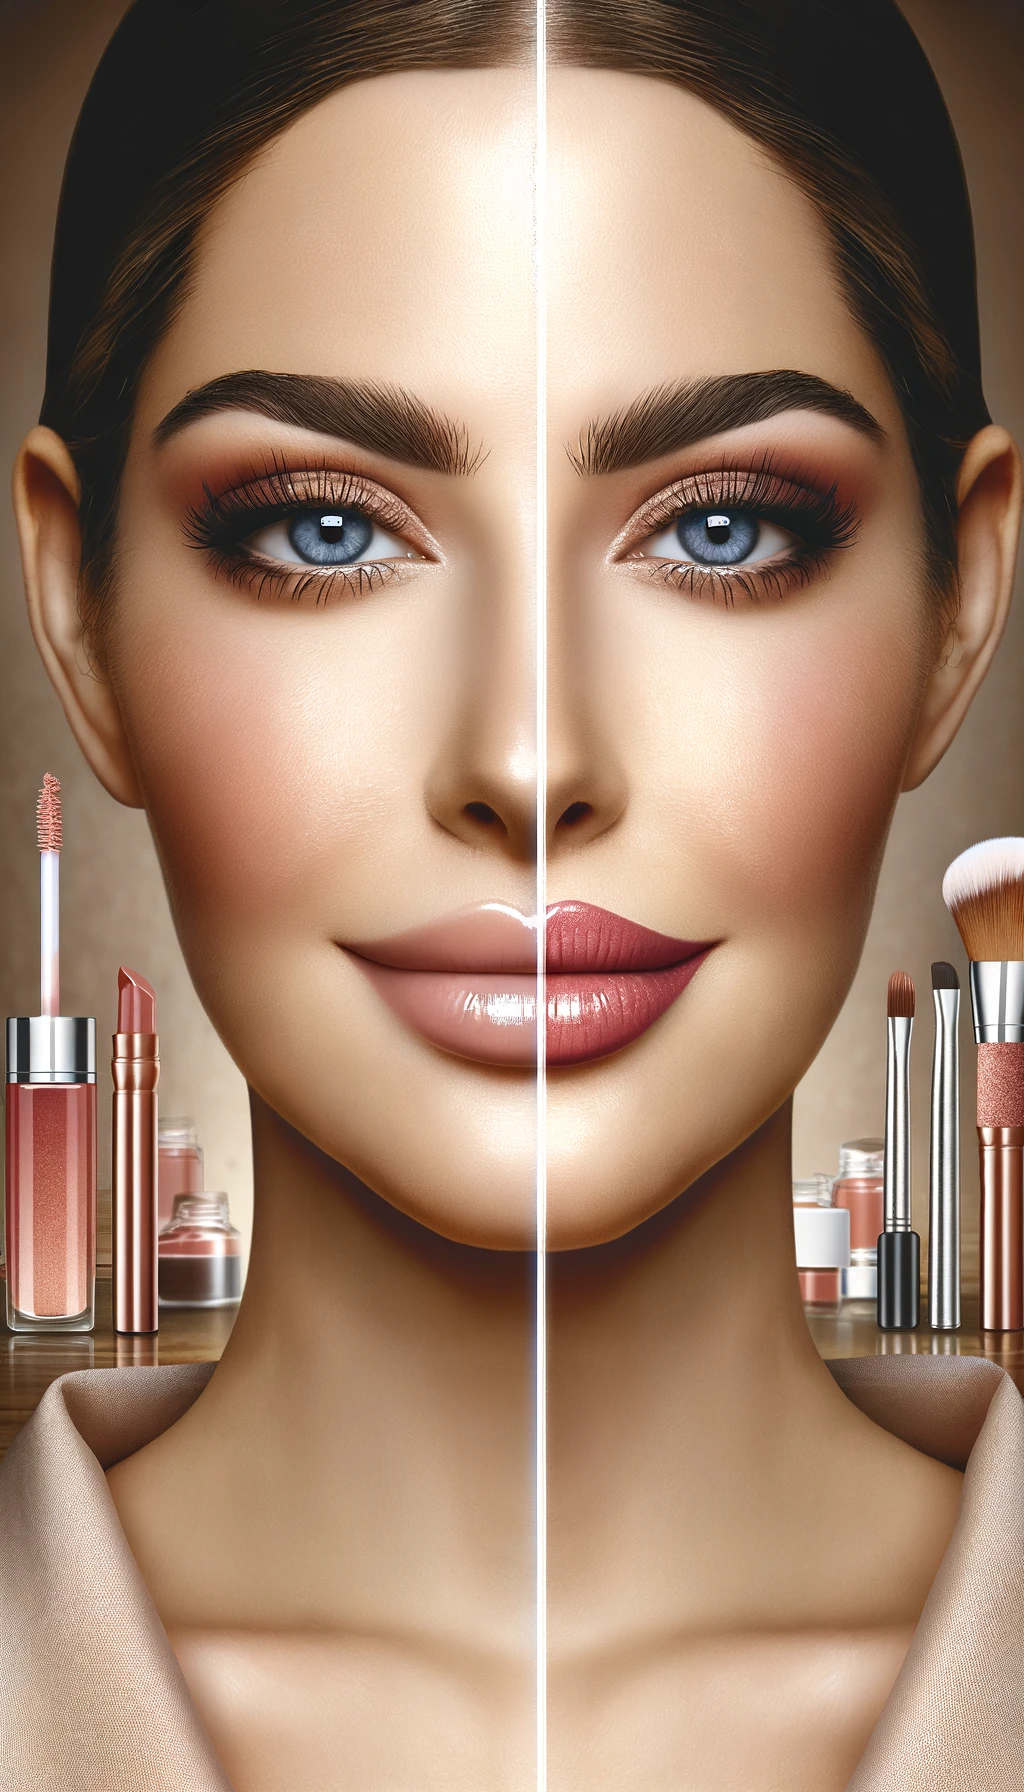 A detailed portrait representing Lip Neutralizing Tips for Achieving the Perfect Lip Color Balance. The image features a woman Caucasian descent